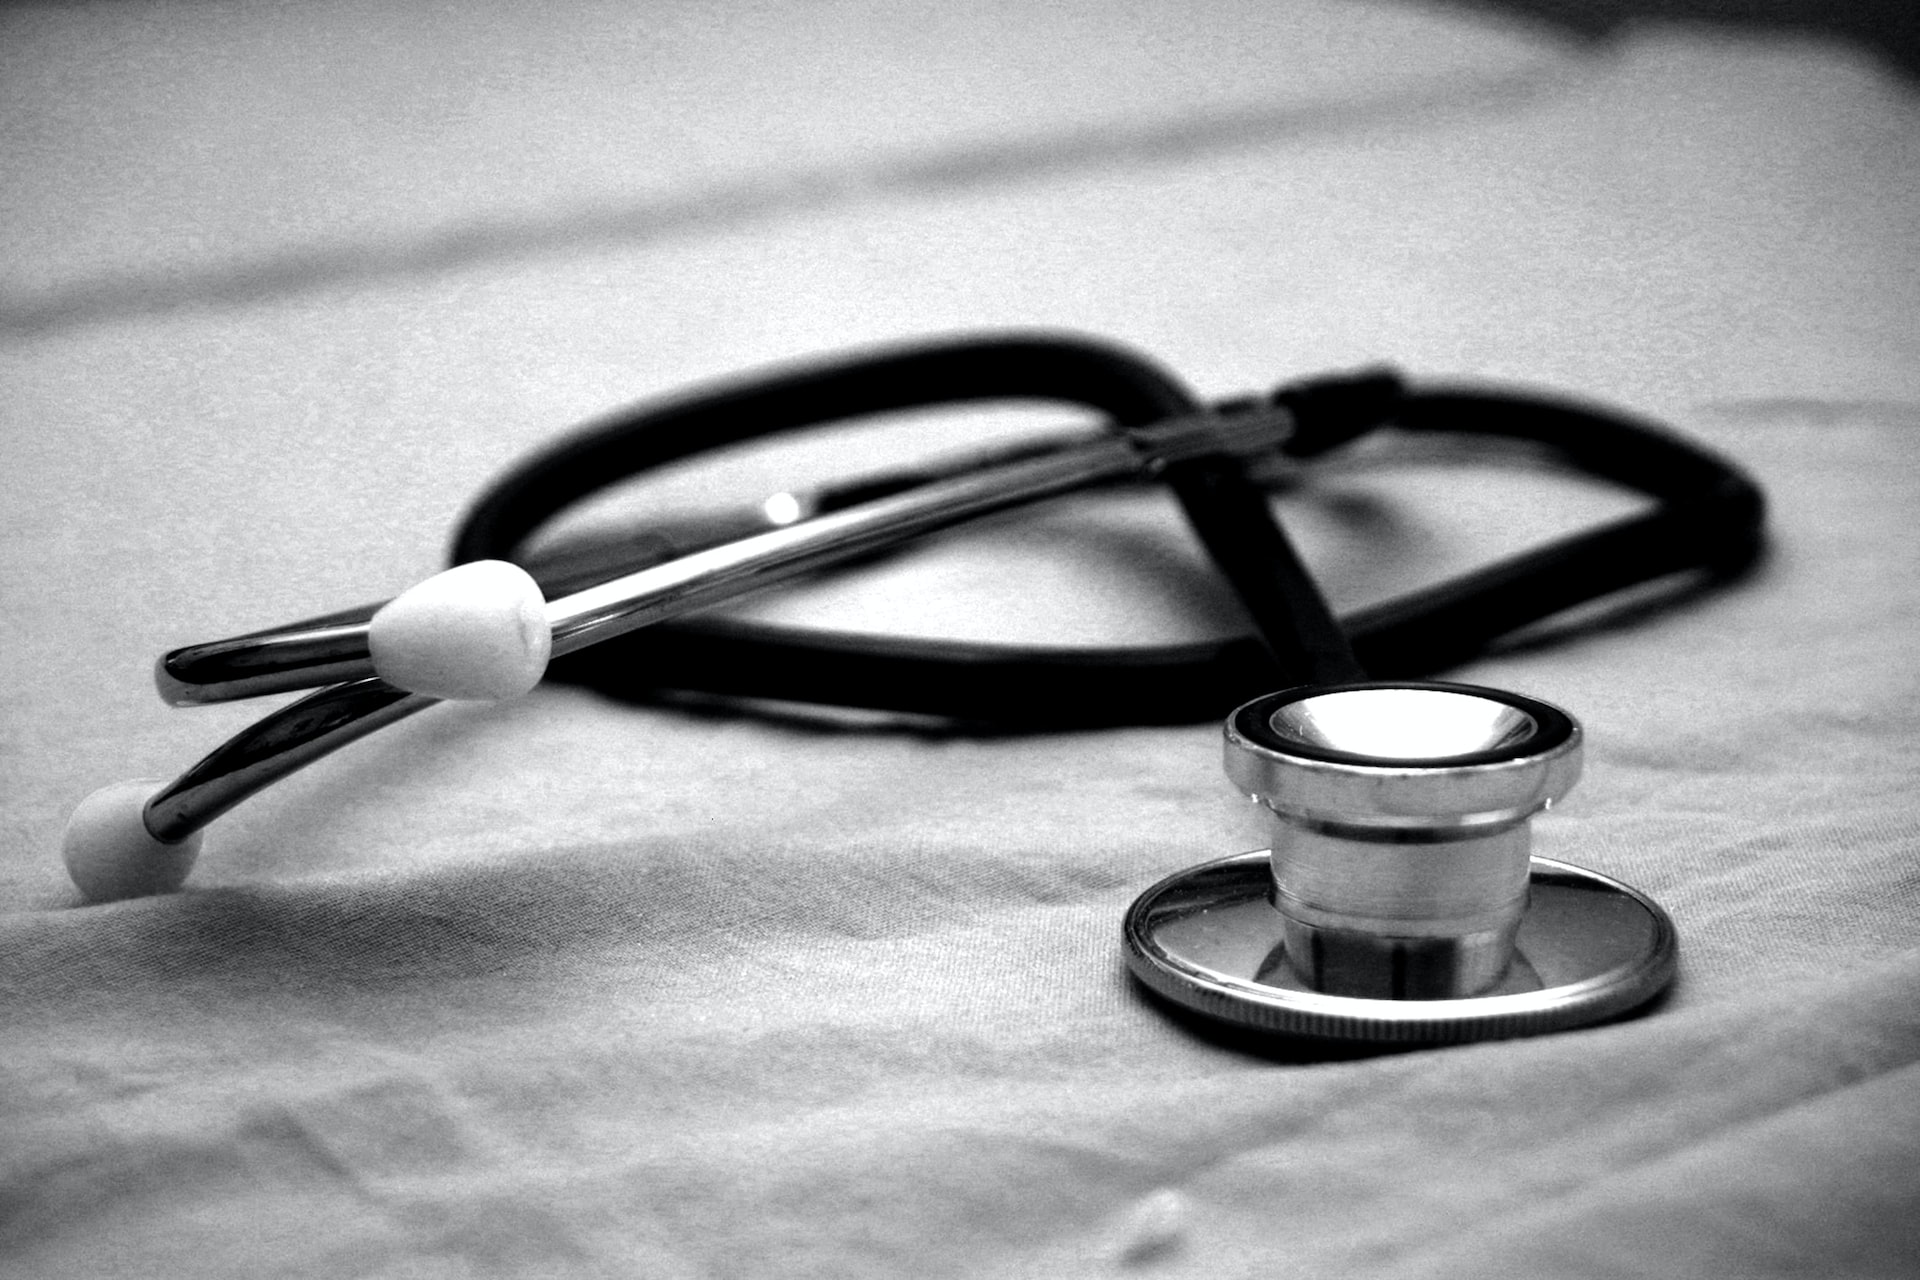 stethoscope-black-and-white-on-table